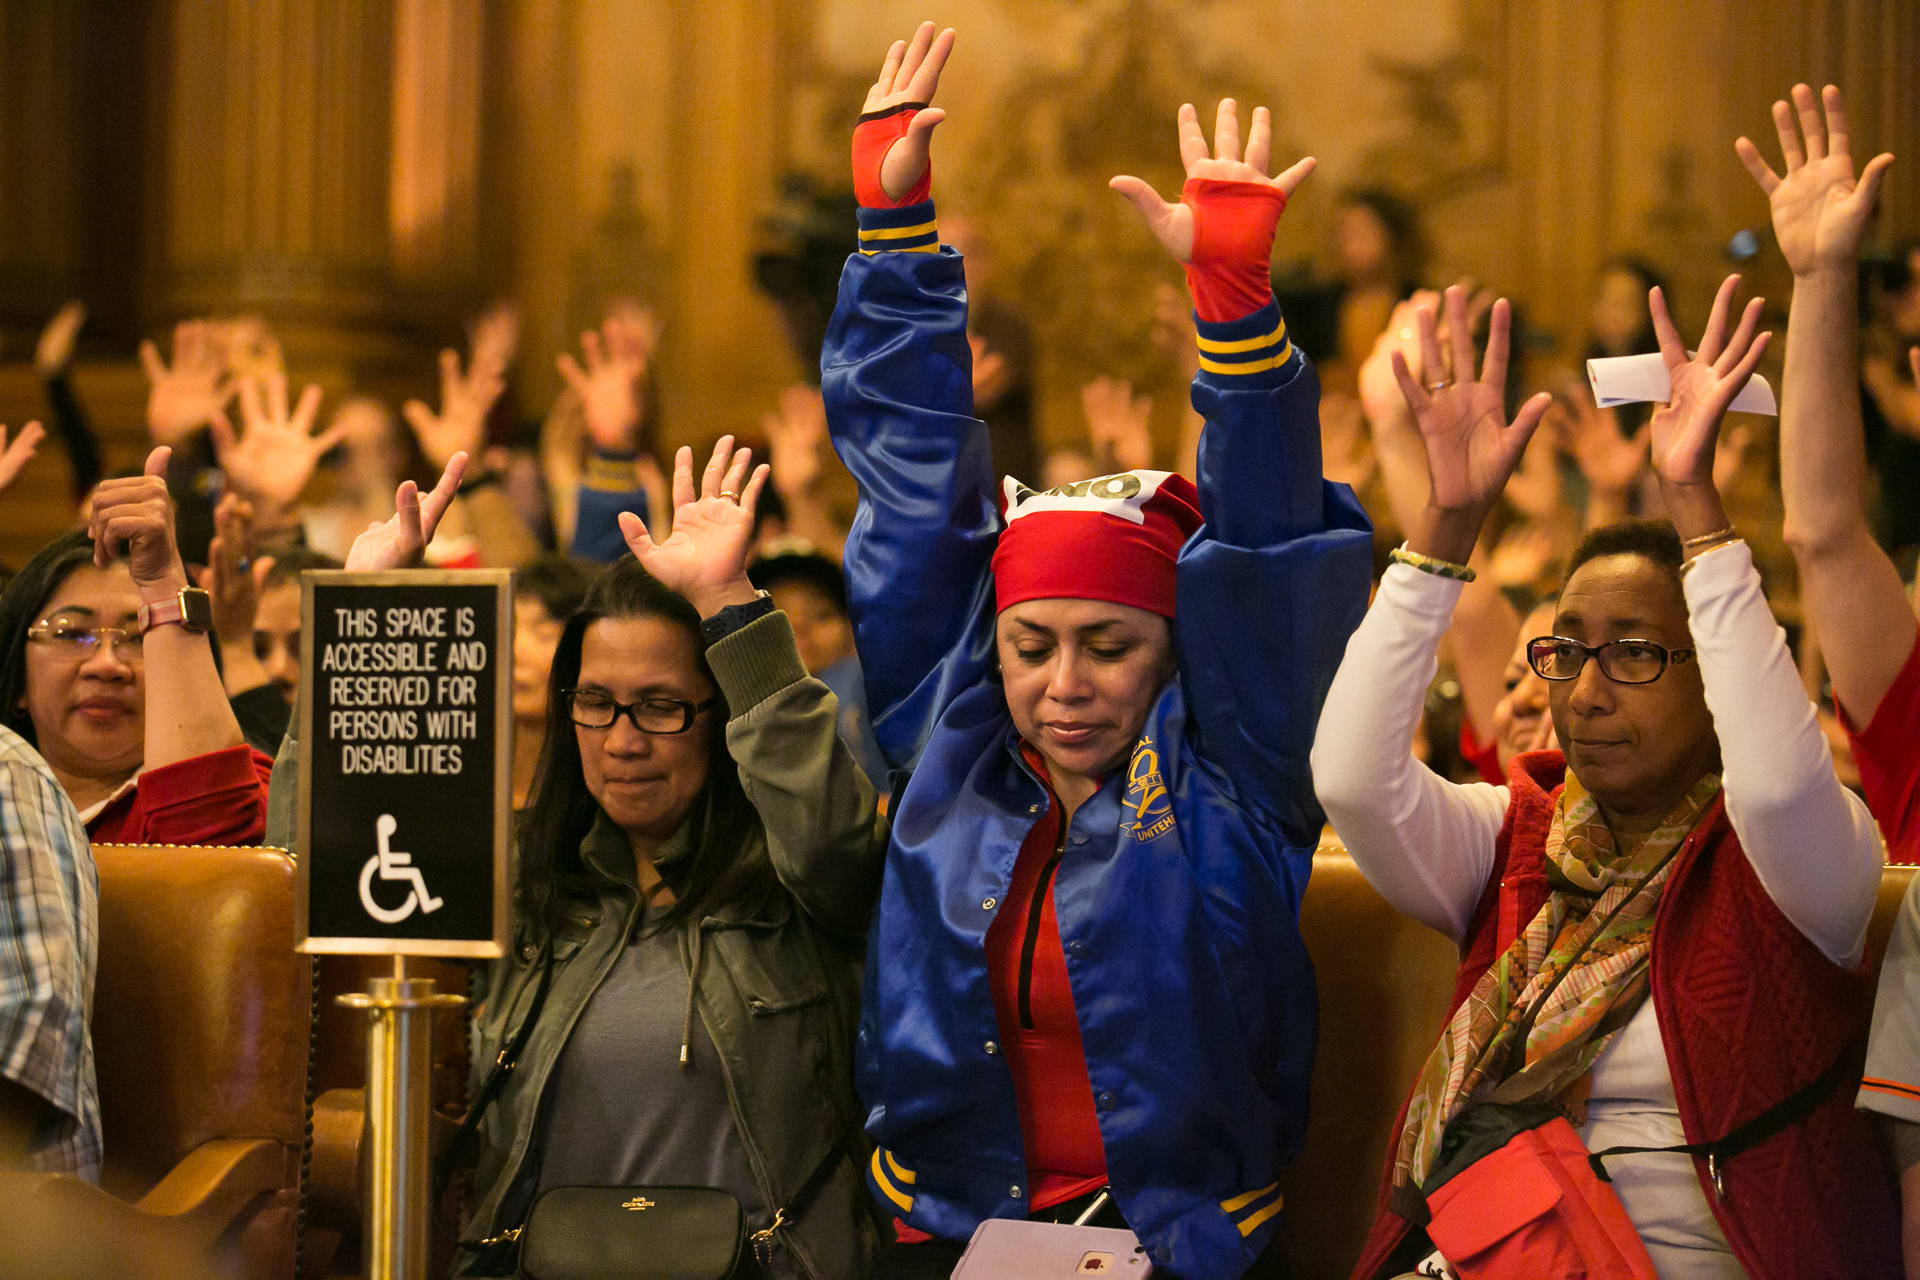 Camucha King (middle right) and Nicole Drysdale (right) gesture in affirmation to a speaker during the public comment section of the San Francisco Board of Supervisors meeting on Nov. 2, 2018. King and Drysdale work at the St. Regis hotel in the food and beverage department. J.P. Dobrin/KQED